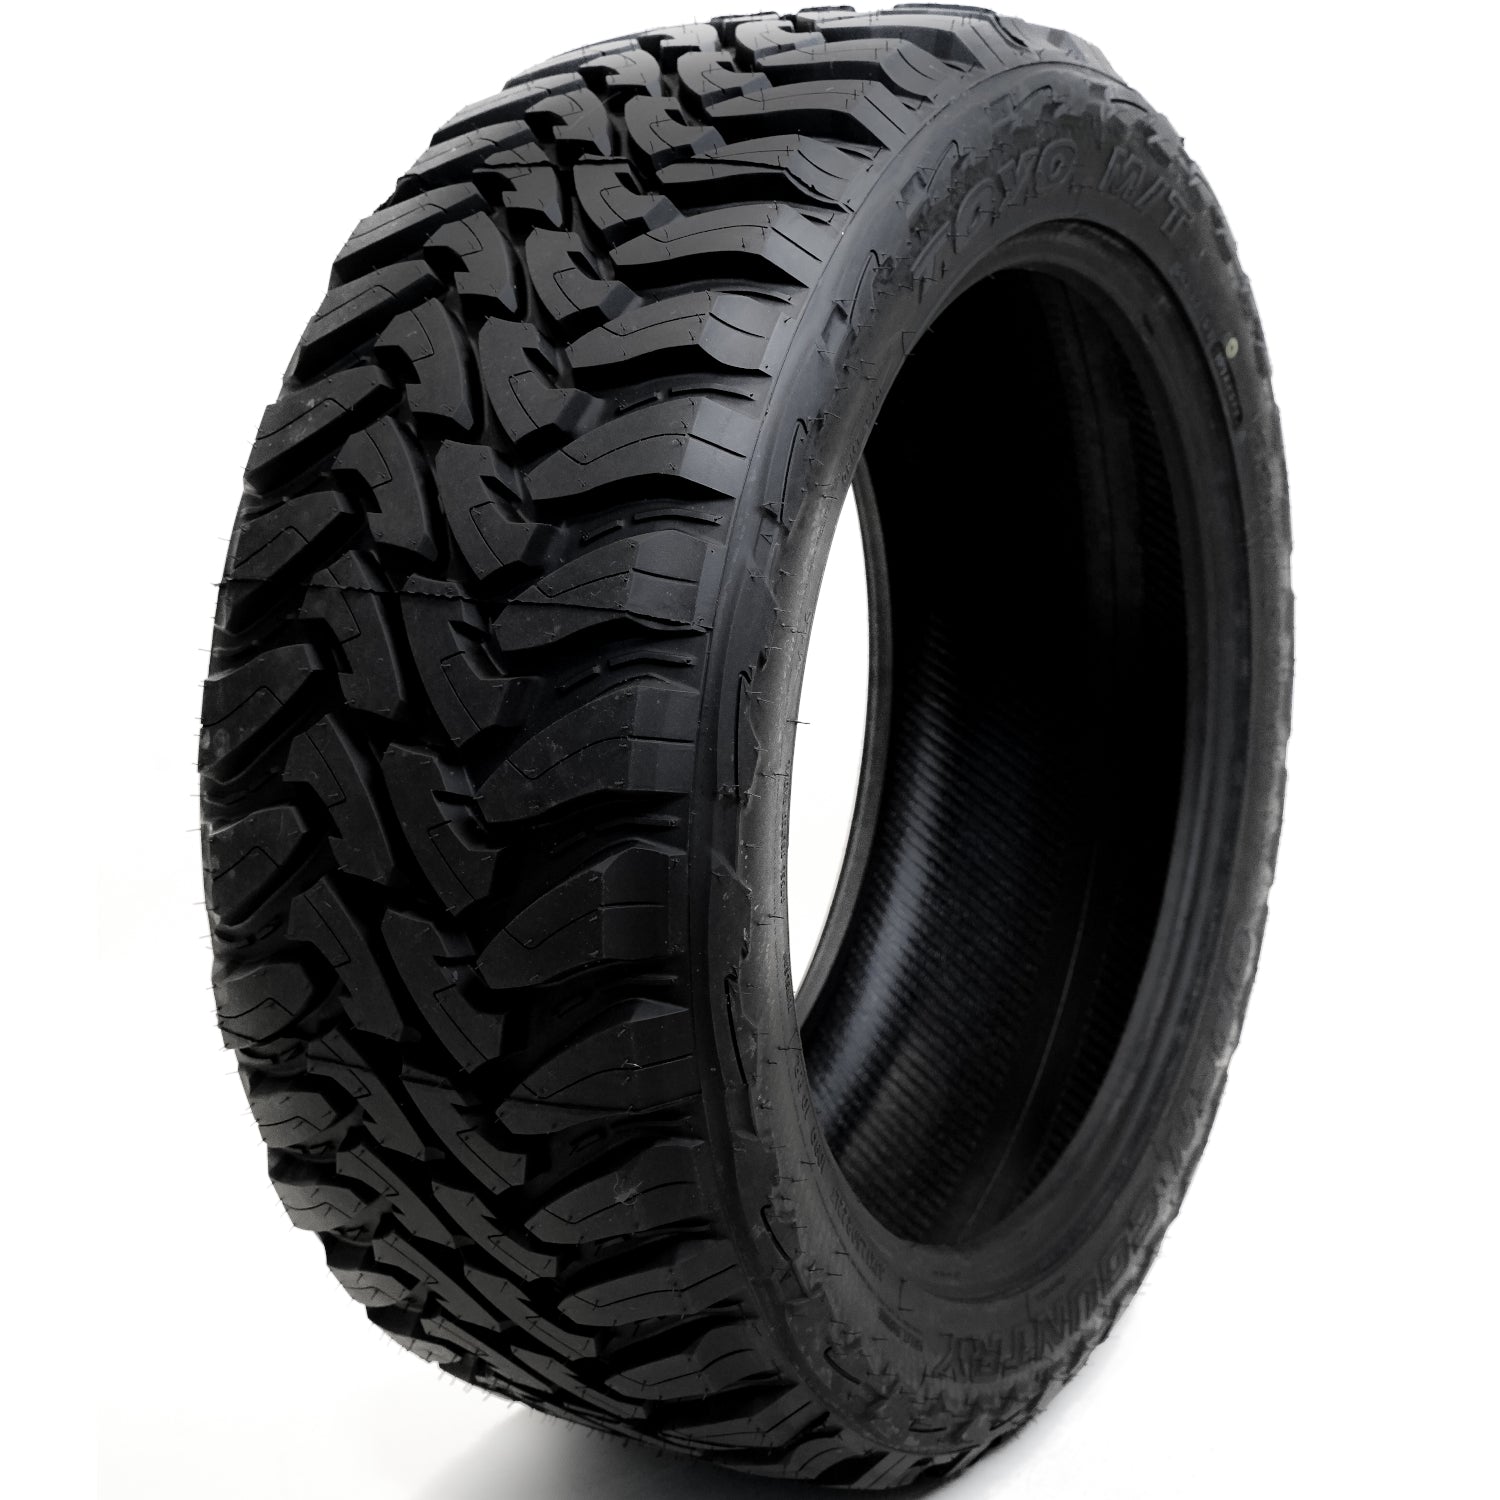 TOYO TIRES OPEN COUNTRY M/T LT255/80R17 (33.3X10R 17) Tires